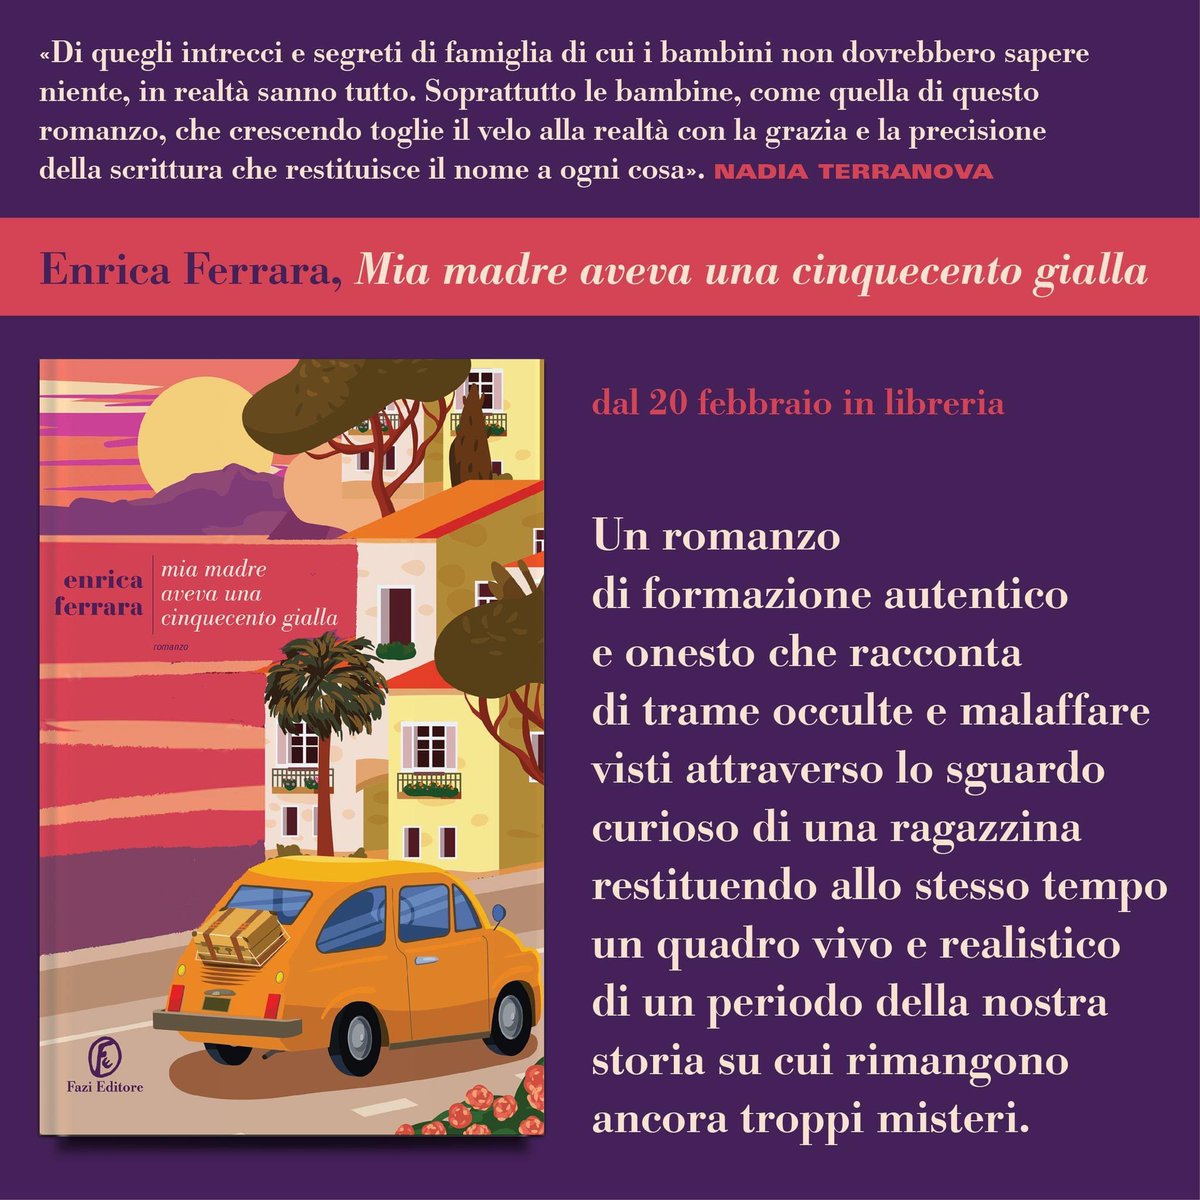 My #debut novel “Mia madre aveva una Cinquecento gialla” @FaziEditore will be available in the bookshops soon! I am so grateful to @nadiaterranova for her magnificent blurb! The book can be preordered here: ibs.it/mia-madre-avev…